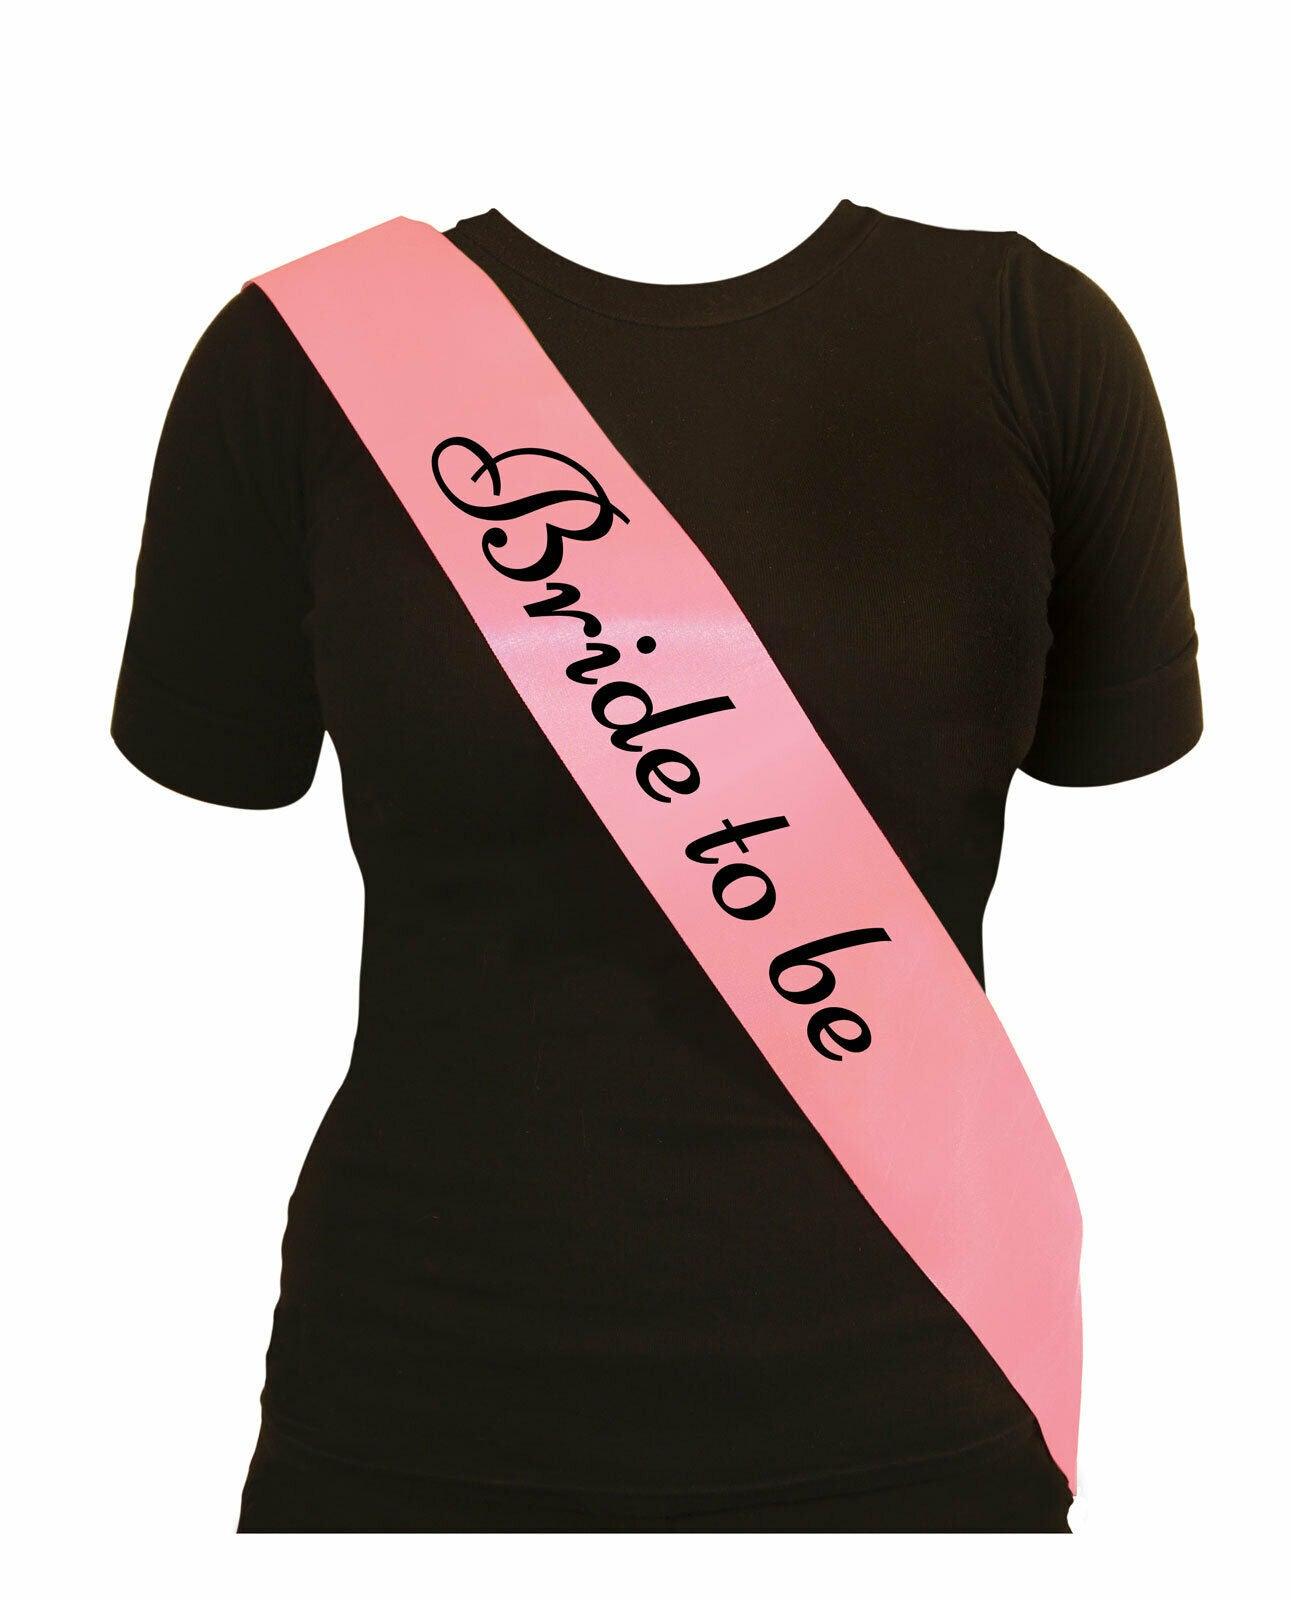 Ladies Bride To Be Sash Pink with Black Text Hen Night Party Fancy Dress - Labreeze